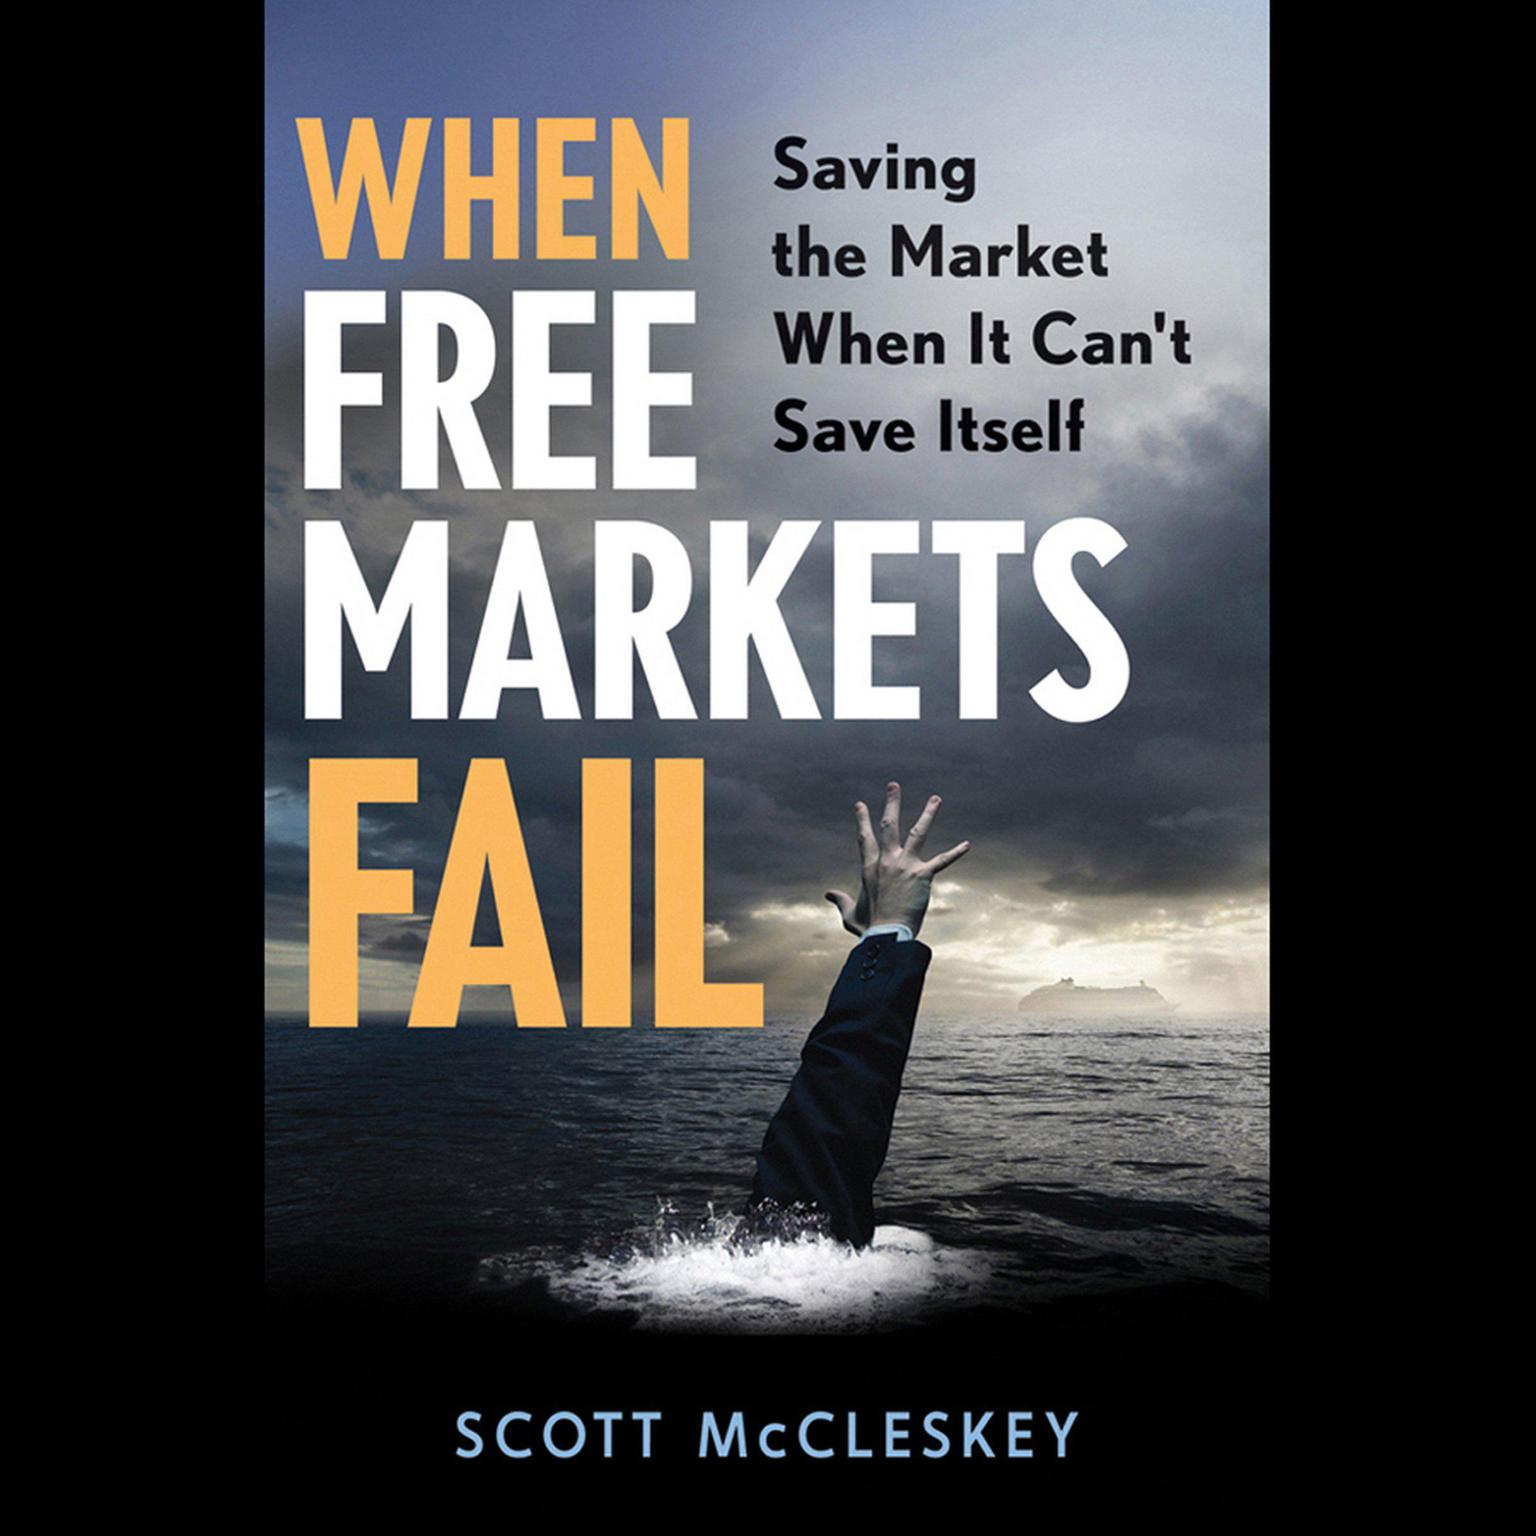 When Free Markets Fail: Saving the Market When It Cant Save Itself Audiobook, by Scott McCleskey